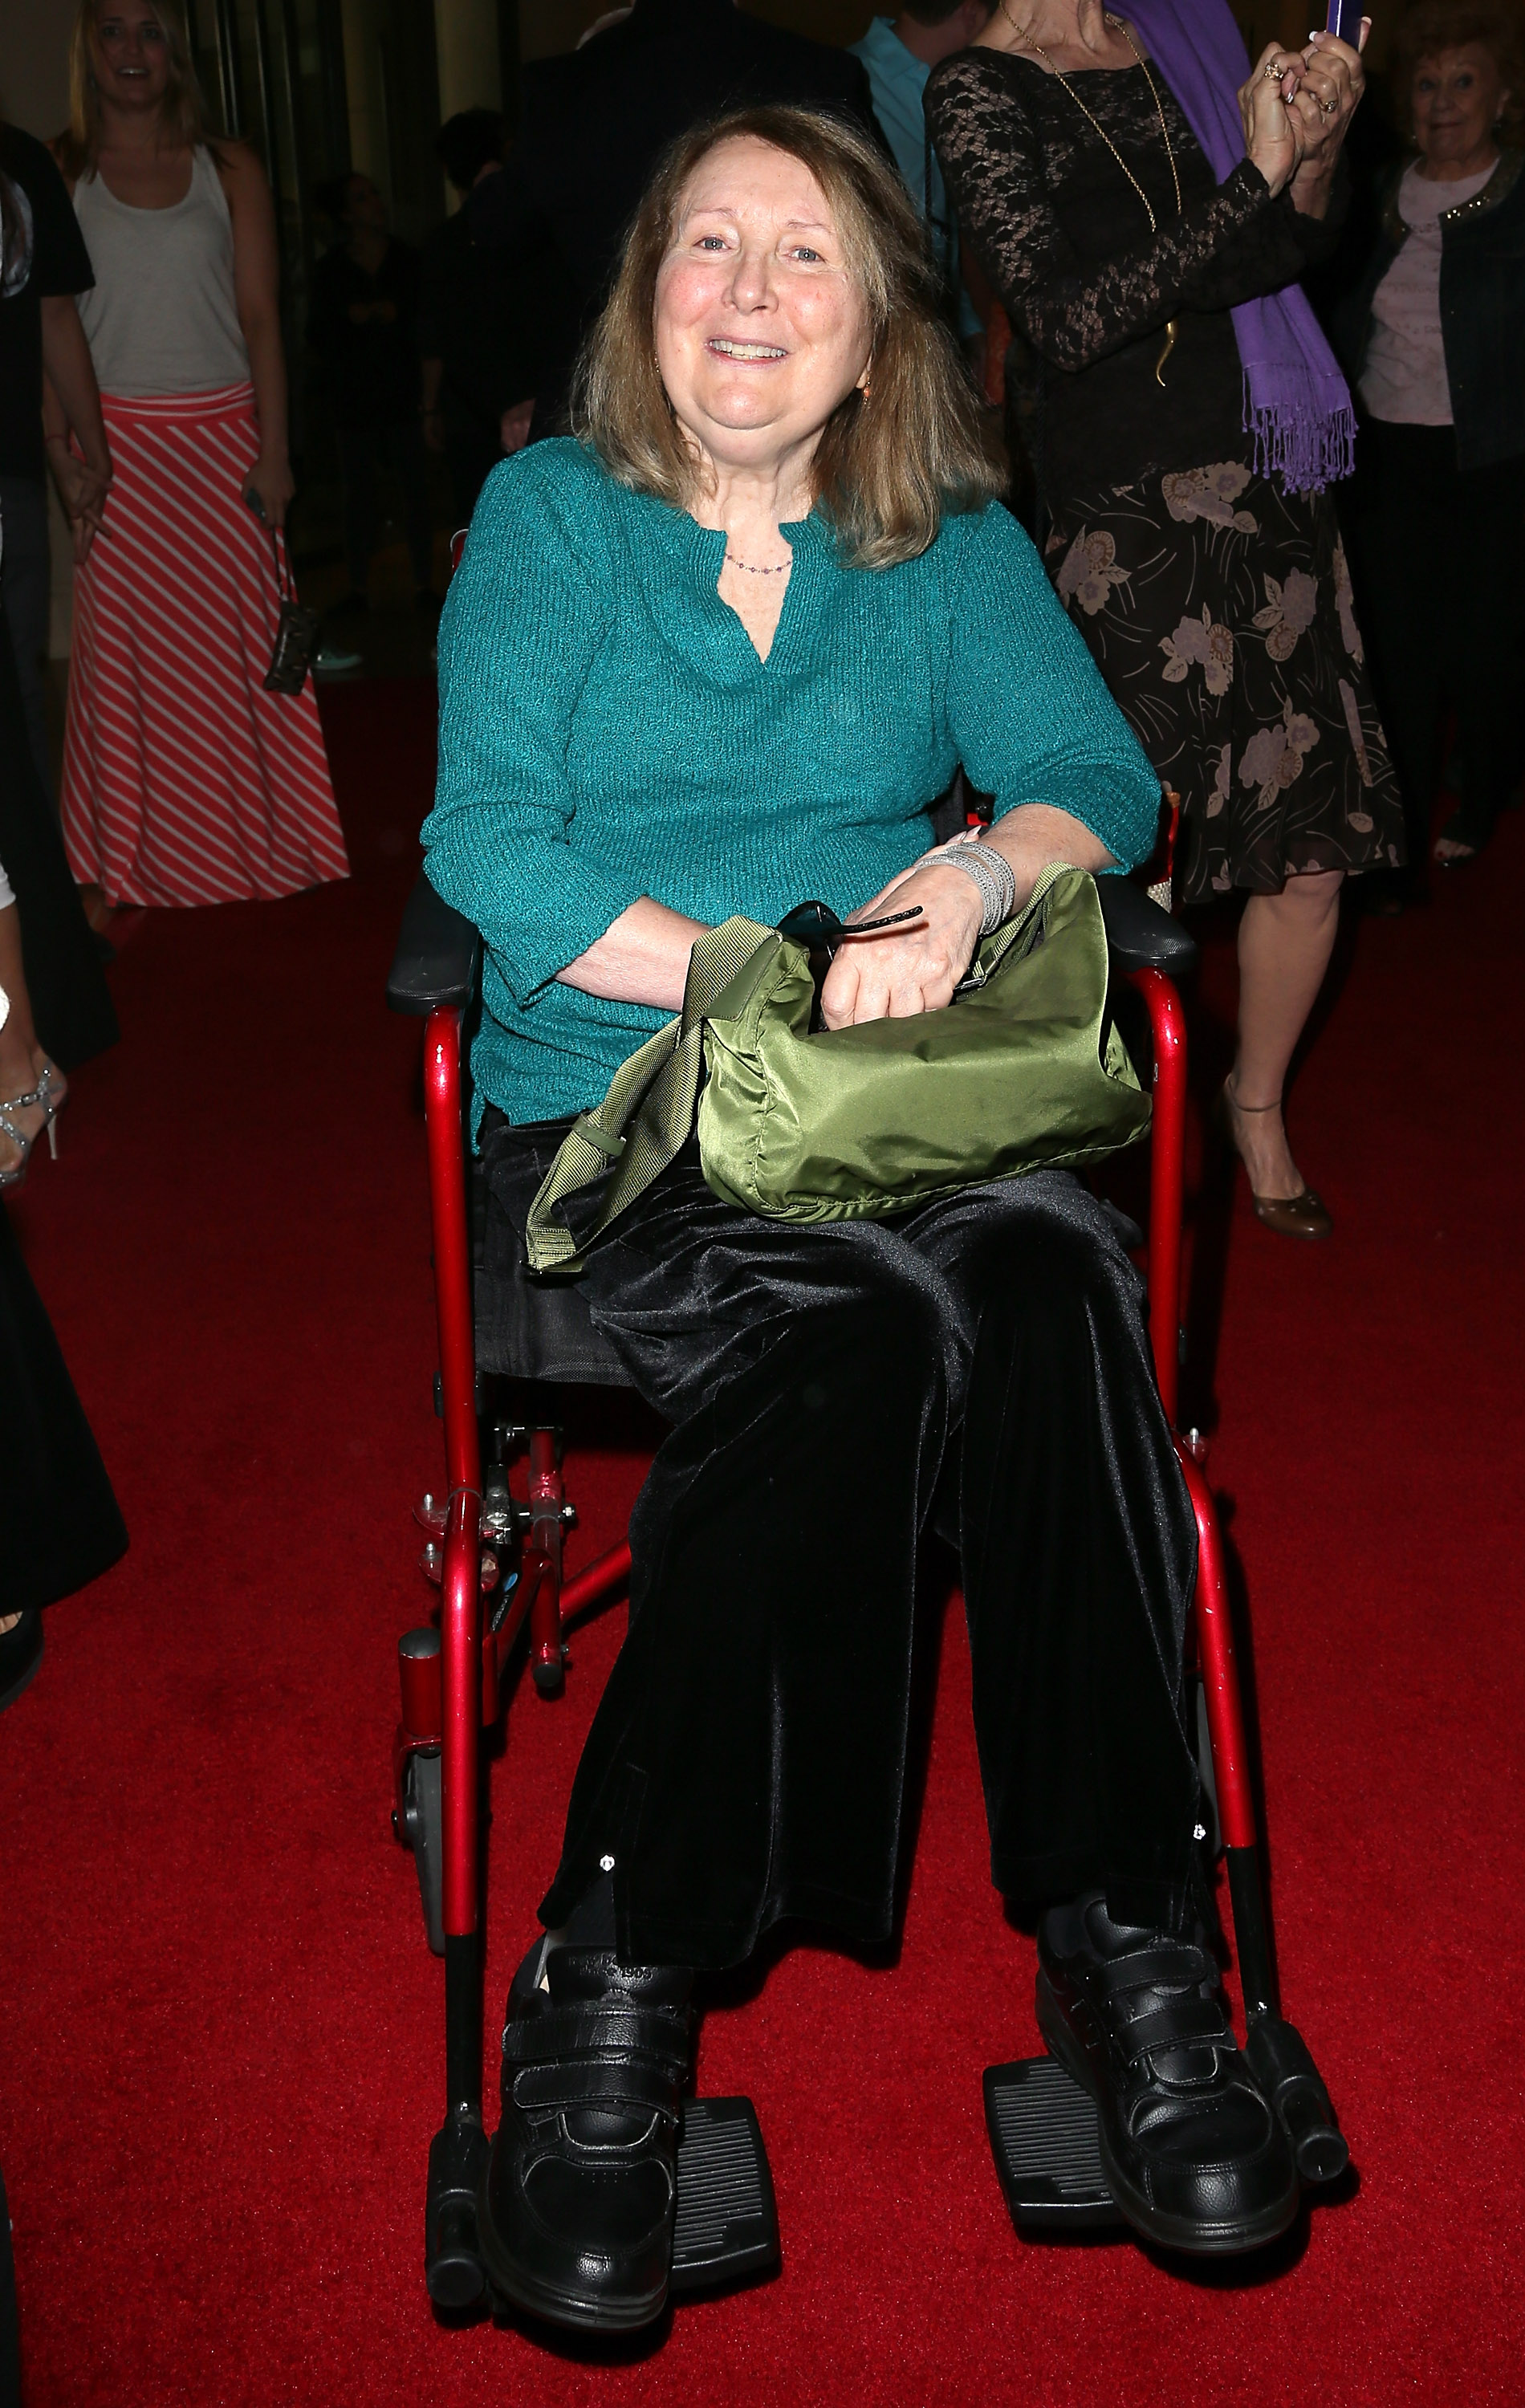 Teri Garr attends the Professional Dancers Society's 27th Annual Gypsy Award Luncheon at The Beverly Hilton Hotel in Beverly Hills, California, on March 30, 2014. | Source: Getty Images